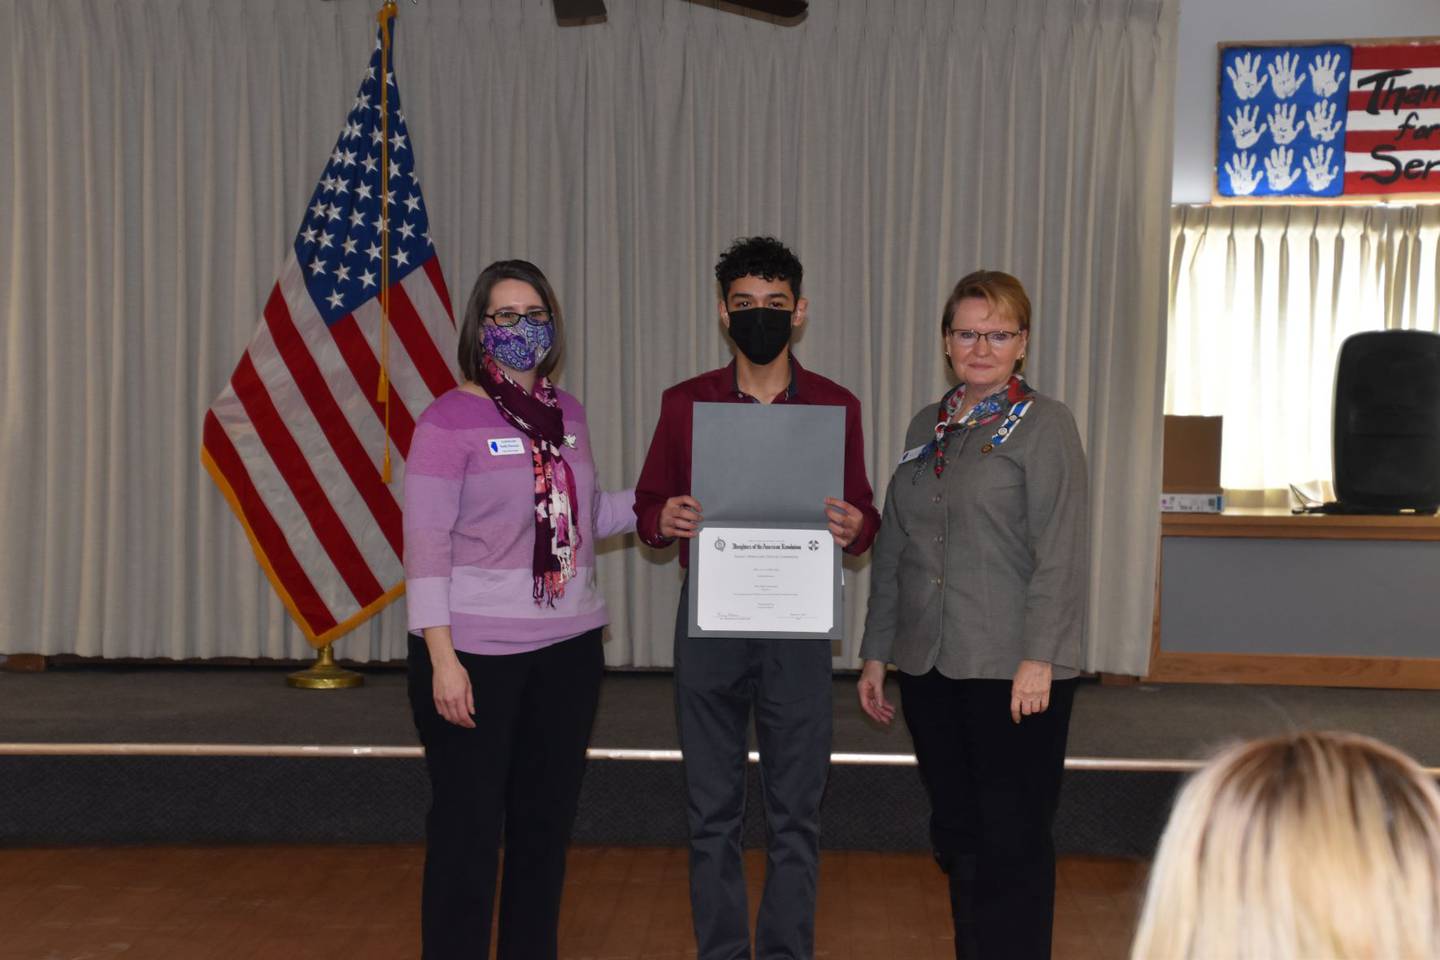 On Saturday, Feb. 5, 2022, the Louis Joliet Chapter NSDAR held a recognition program for the six students named the Louis Joliet Chapter DAR Good Citizen for 2021-2022, according to a news release from chapter. In addition, Jonathan Montesinos from Joliet Central was awarded a certificate and $25 monetary award for his short story entry to the Junior American Citizen contest titled “Thank You, Brother.” Pictured, from left, are Chair Emily Petronio, Johnathan Montesinos, and Regent Marie Lozano.